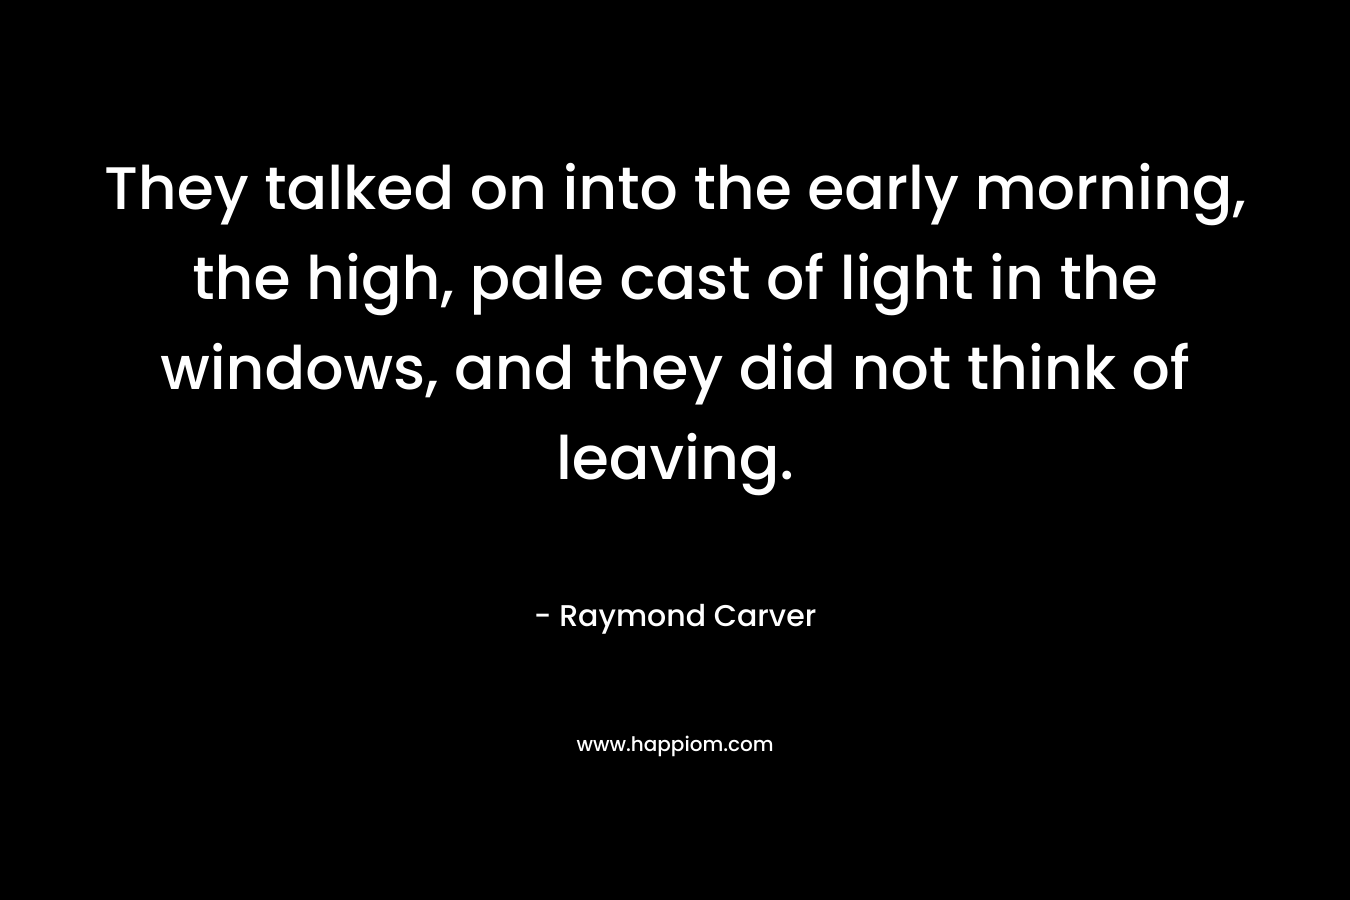 They talked on into the early morning, the high, pale cast of light in the windows, and they did not think of leaving. – Raymond Carver